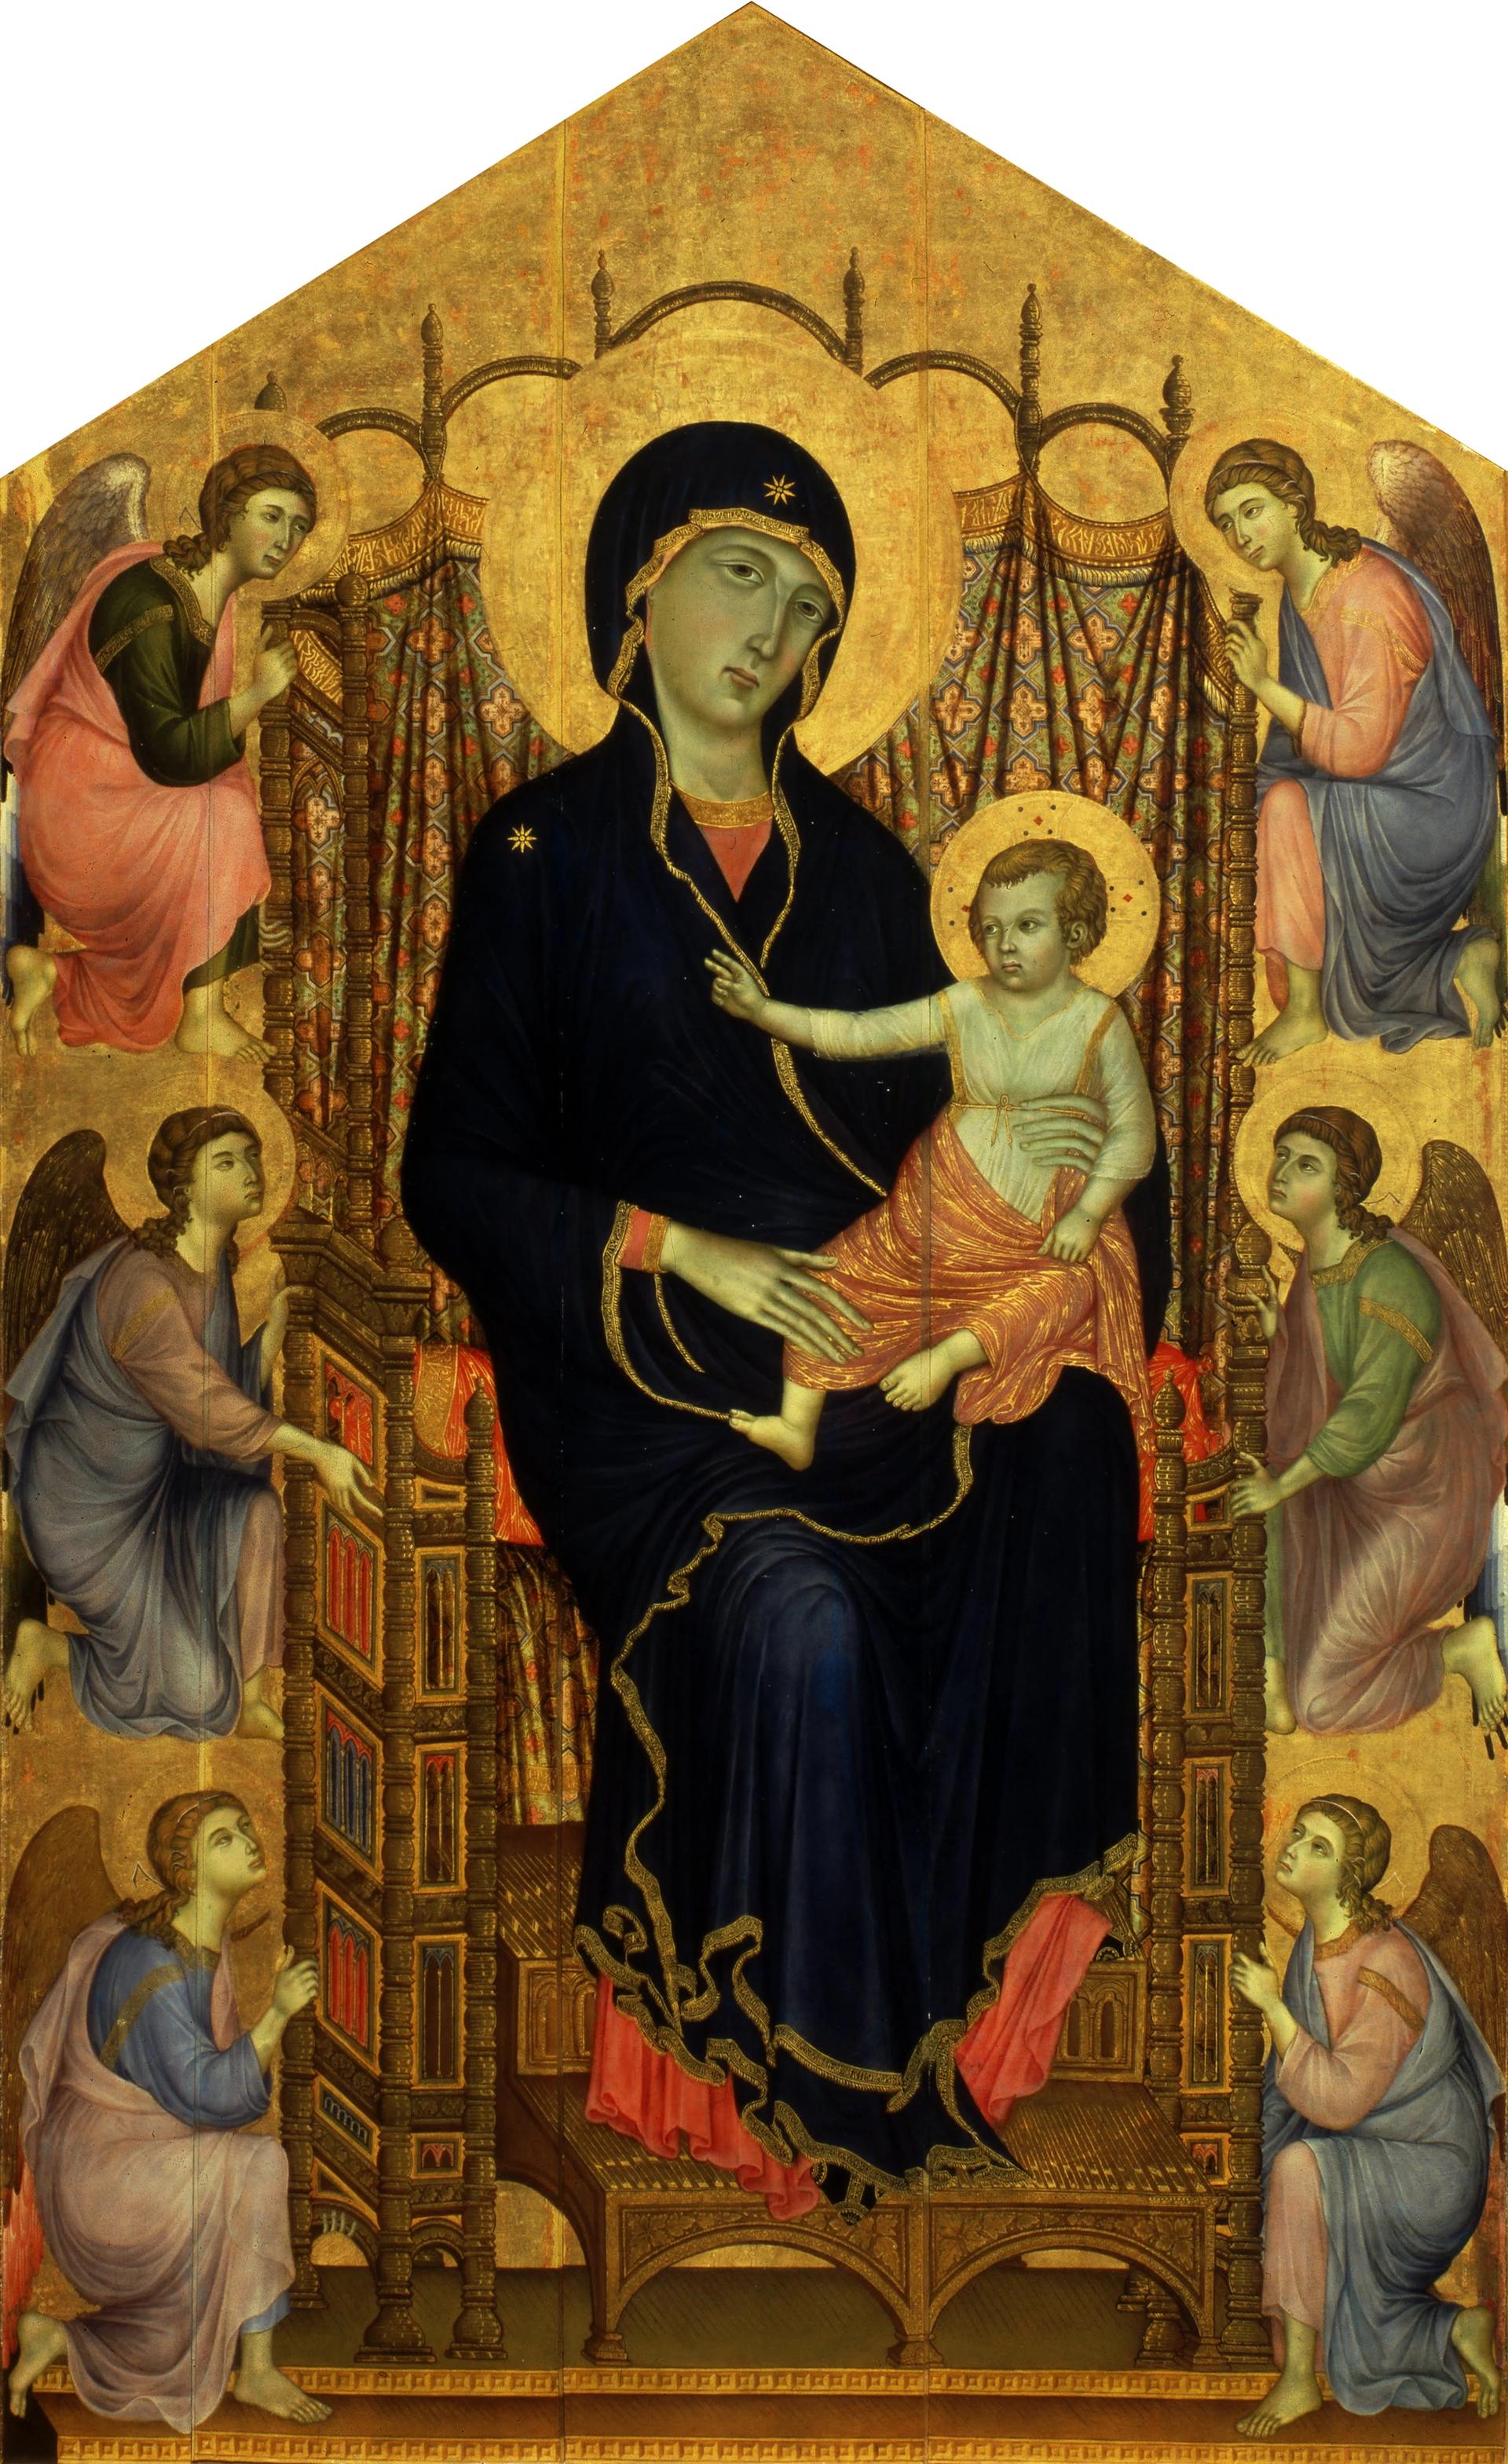 The Rucellai Madonna by Duccio, 1285, Uffizi, Florence.  Commissioned by the Confraternity of the Laudesi, which had a special devotion to the Madonna, for their chapel in Santa Maria Novella. Moved in 1591 to the Rucellai chapel, hence its name 